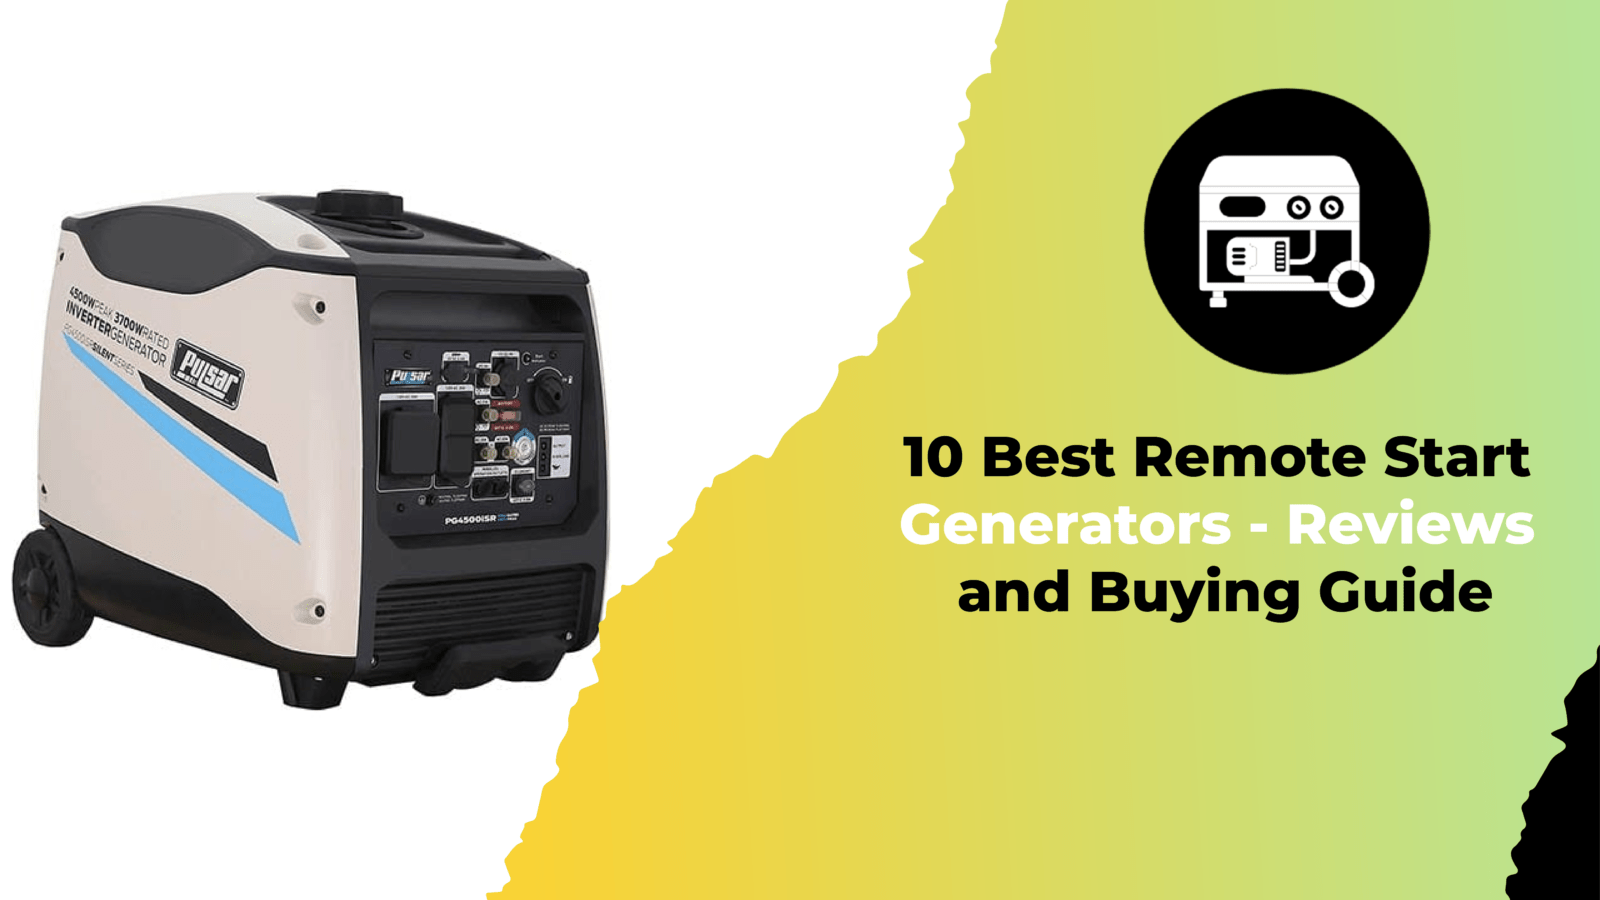 10 Best Remote Start Generators - Reviews and Buying Guide